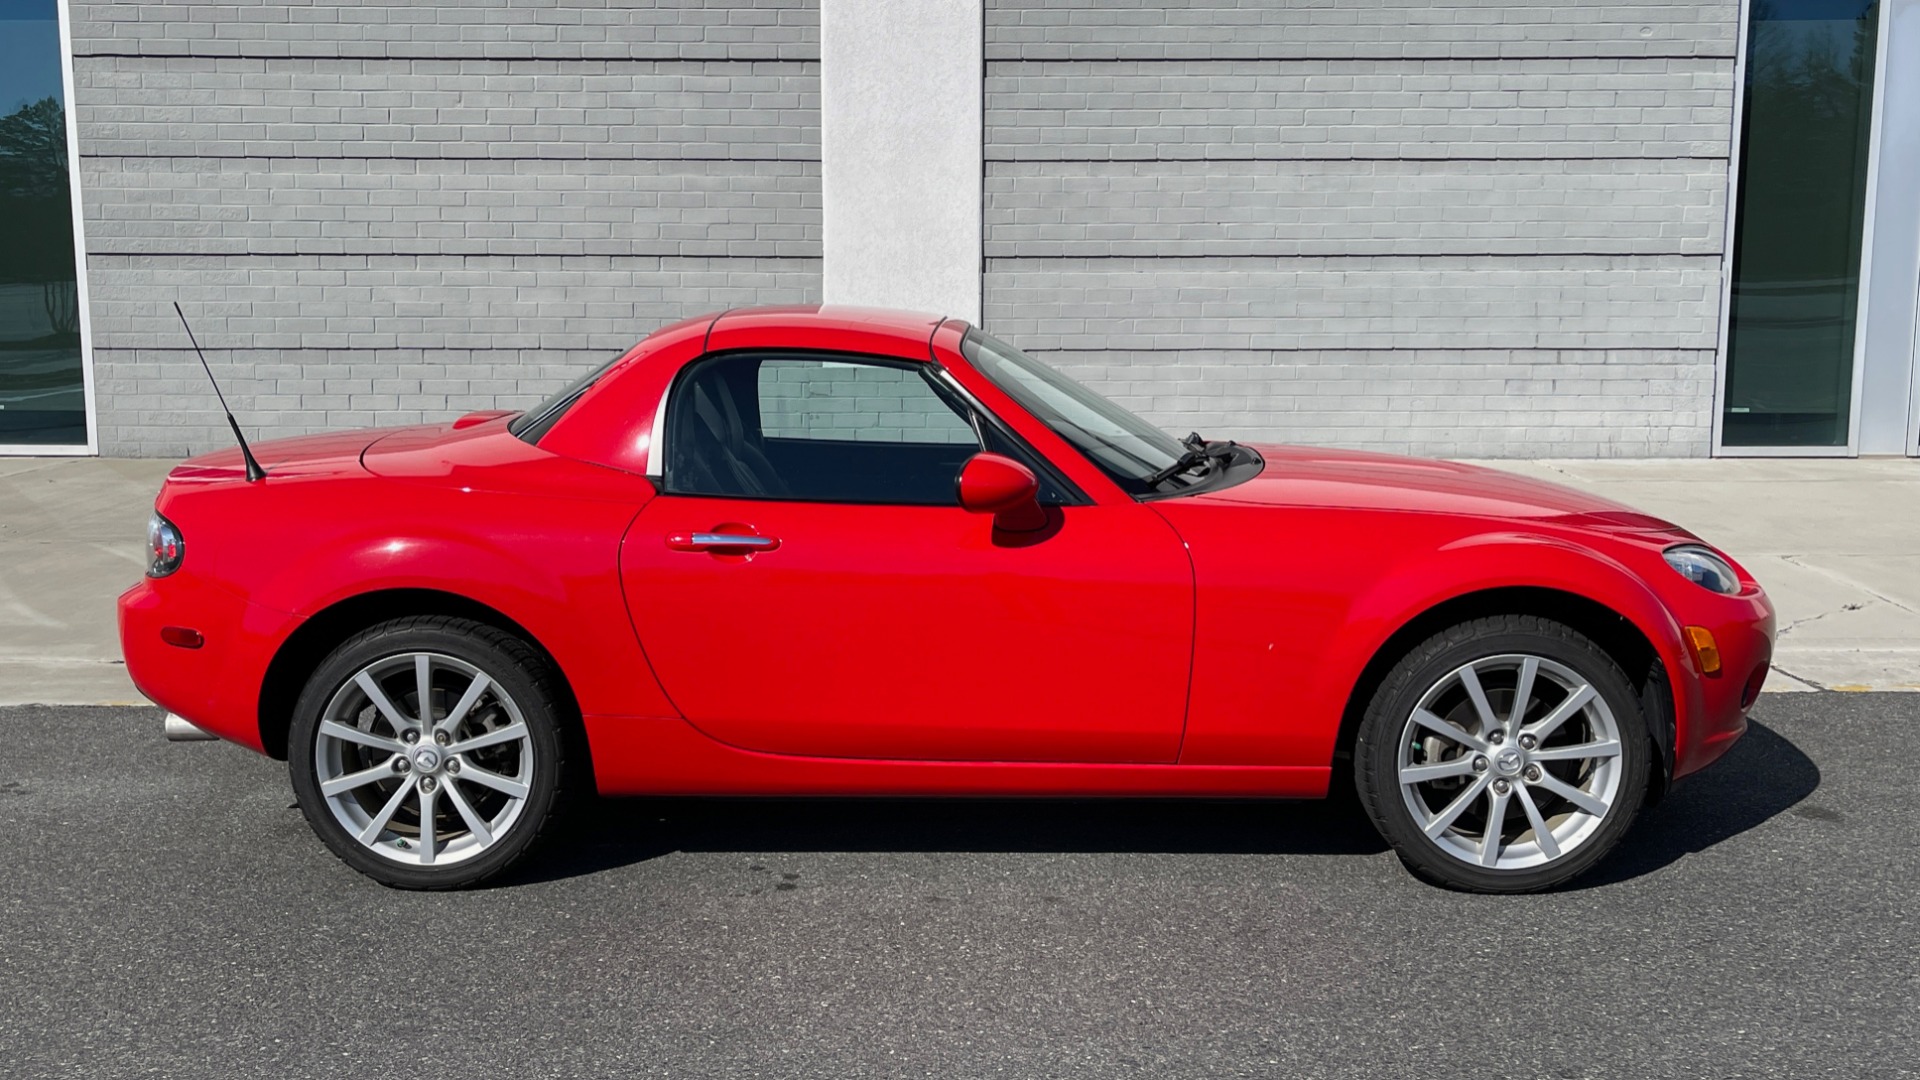 Used 2008 Mazda MX-5 MIATA GRAND TOURING / PRHT 2DR / MANUAL / 17IN ALLOY WHLS / LOW MILES for sale $20,995 at Formula Imports in Charlotte NC 28227 6